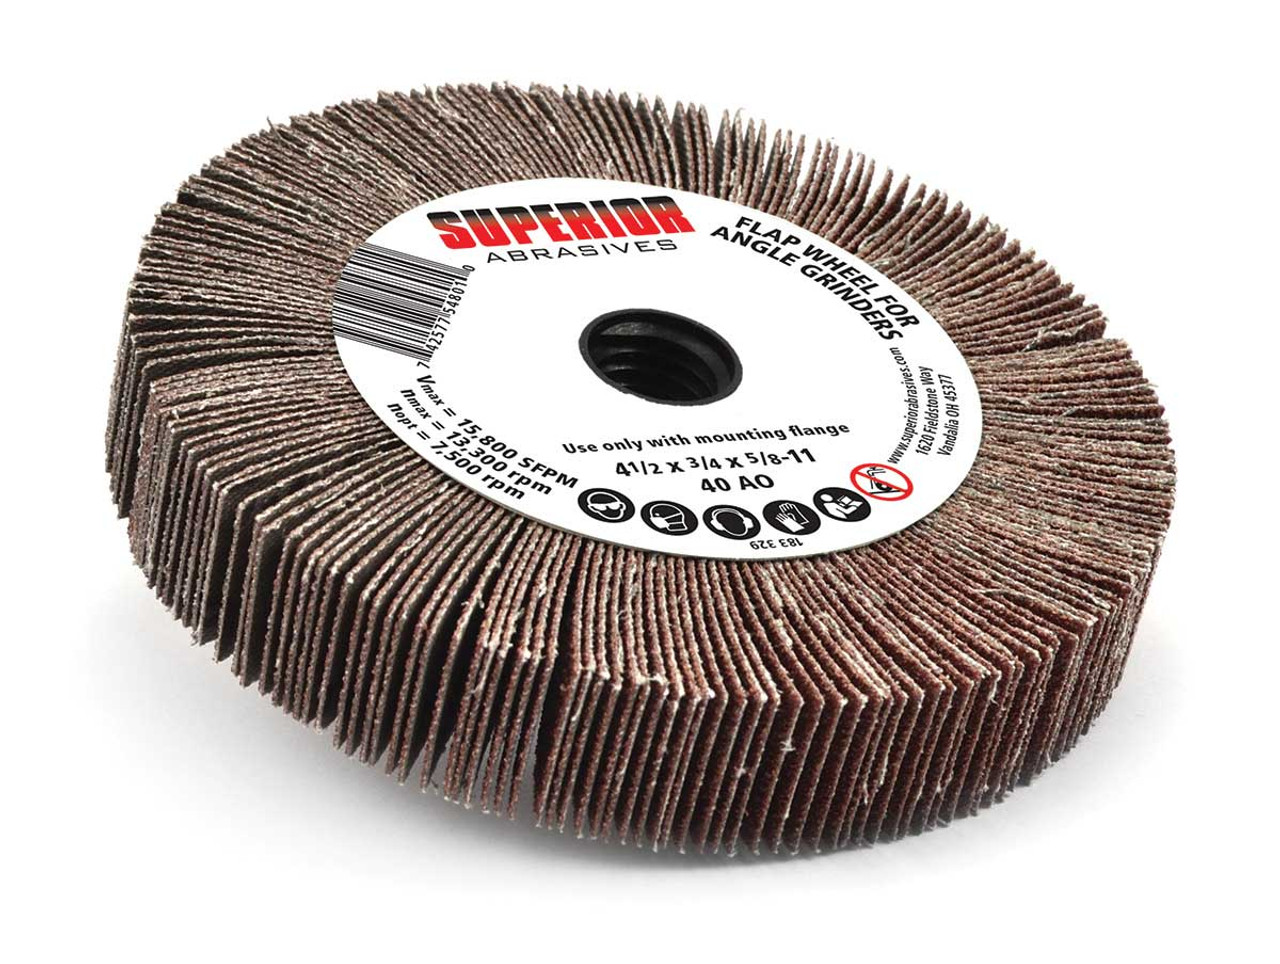 SHUR-KUT 4-1/2" x 3/4" x 5/8"-11 Aluminum Oxide Flap Wheel for Angle Grinder, 40 Grit PACKAGE OF 10